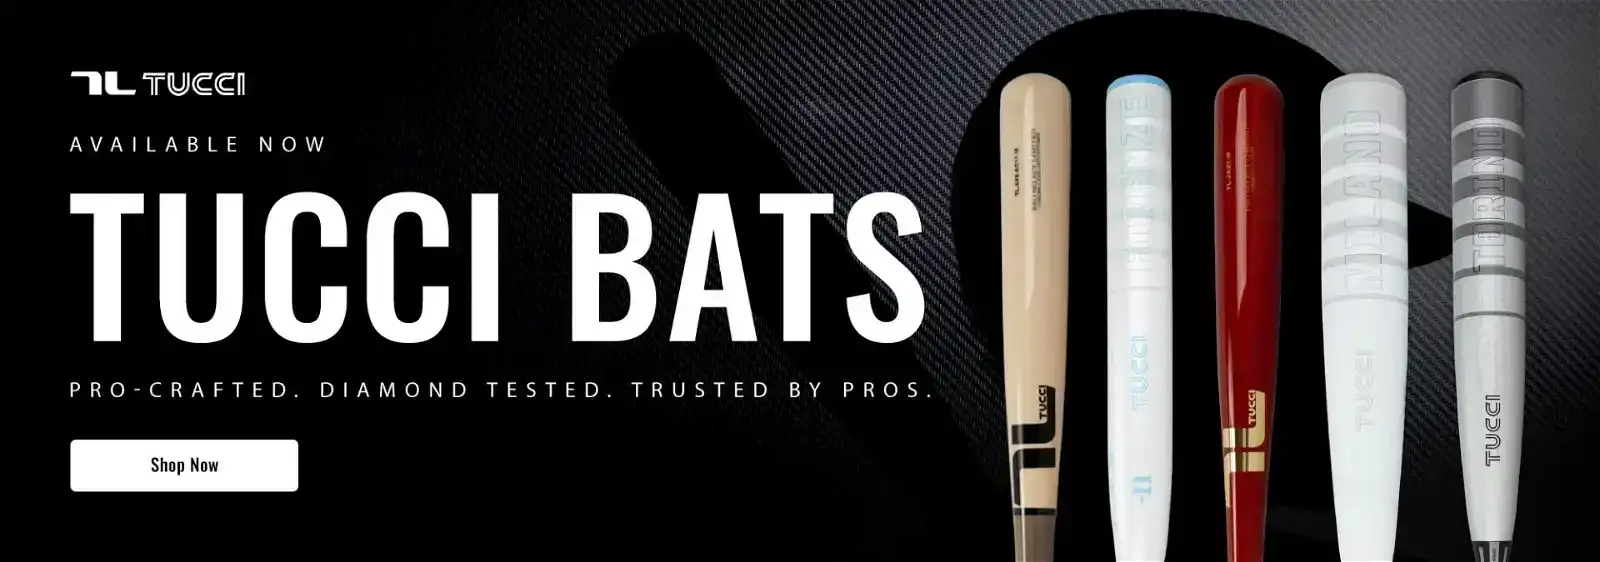 Tucci Bats | Pro-crafted, diamond tested